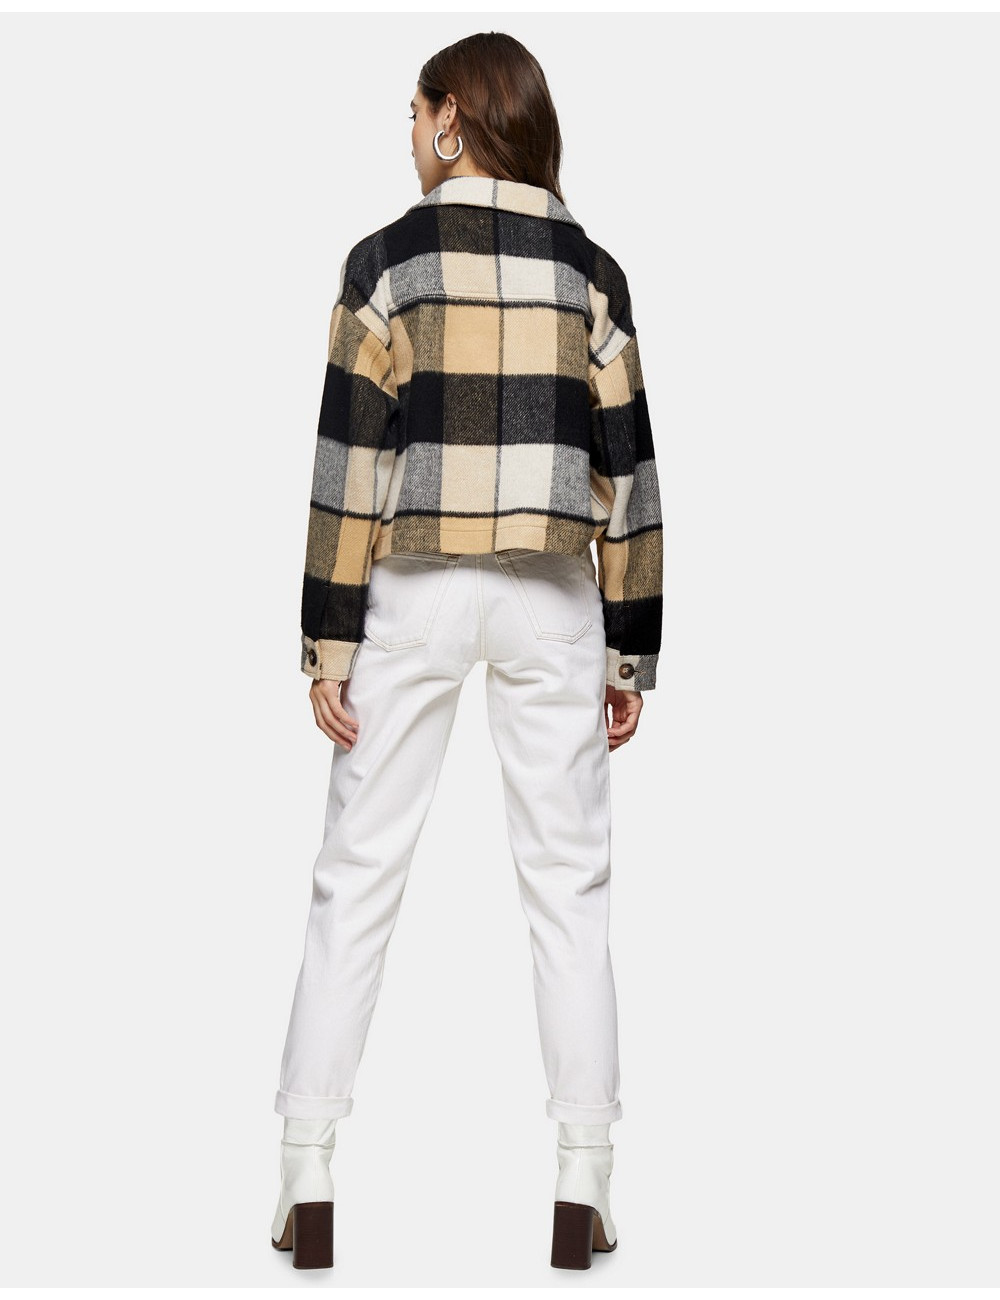 Topshop Mom jeans in off-white